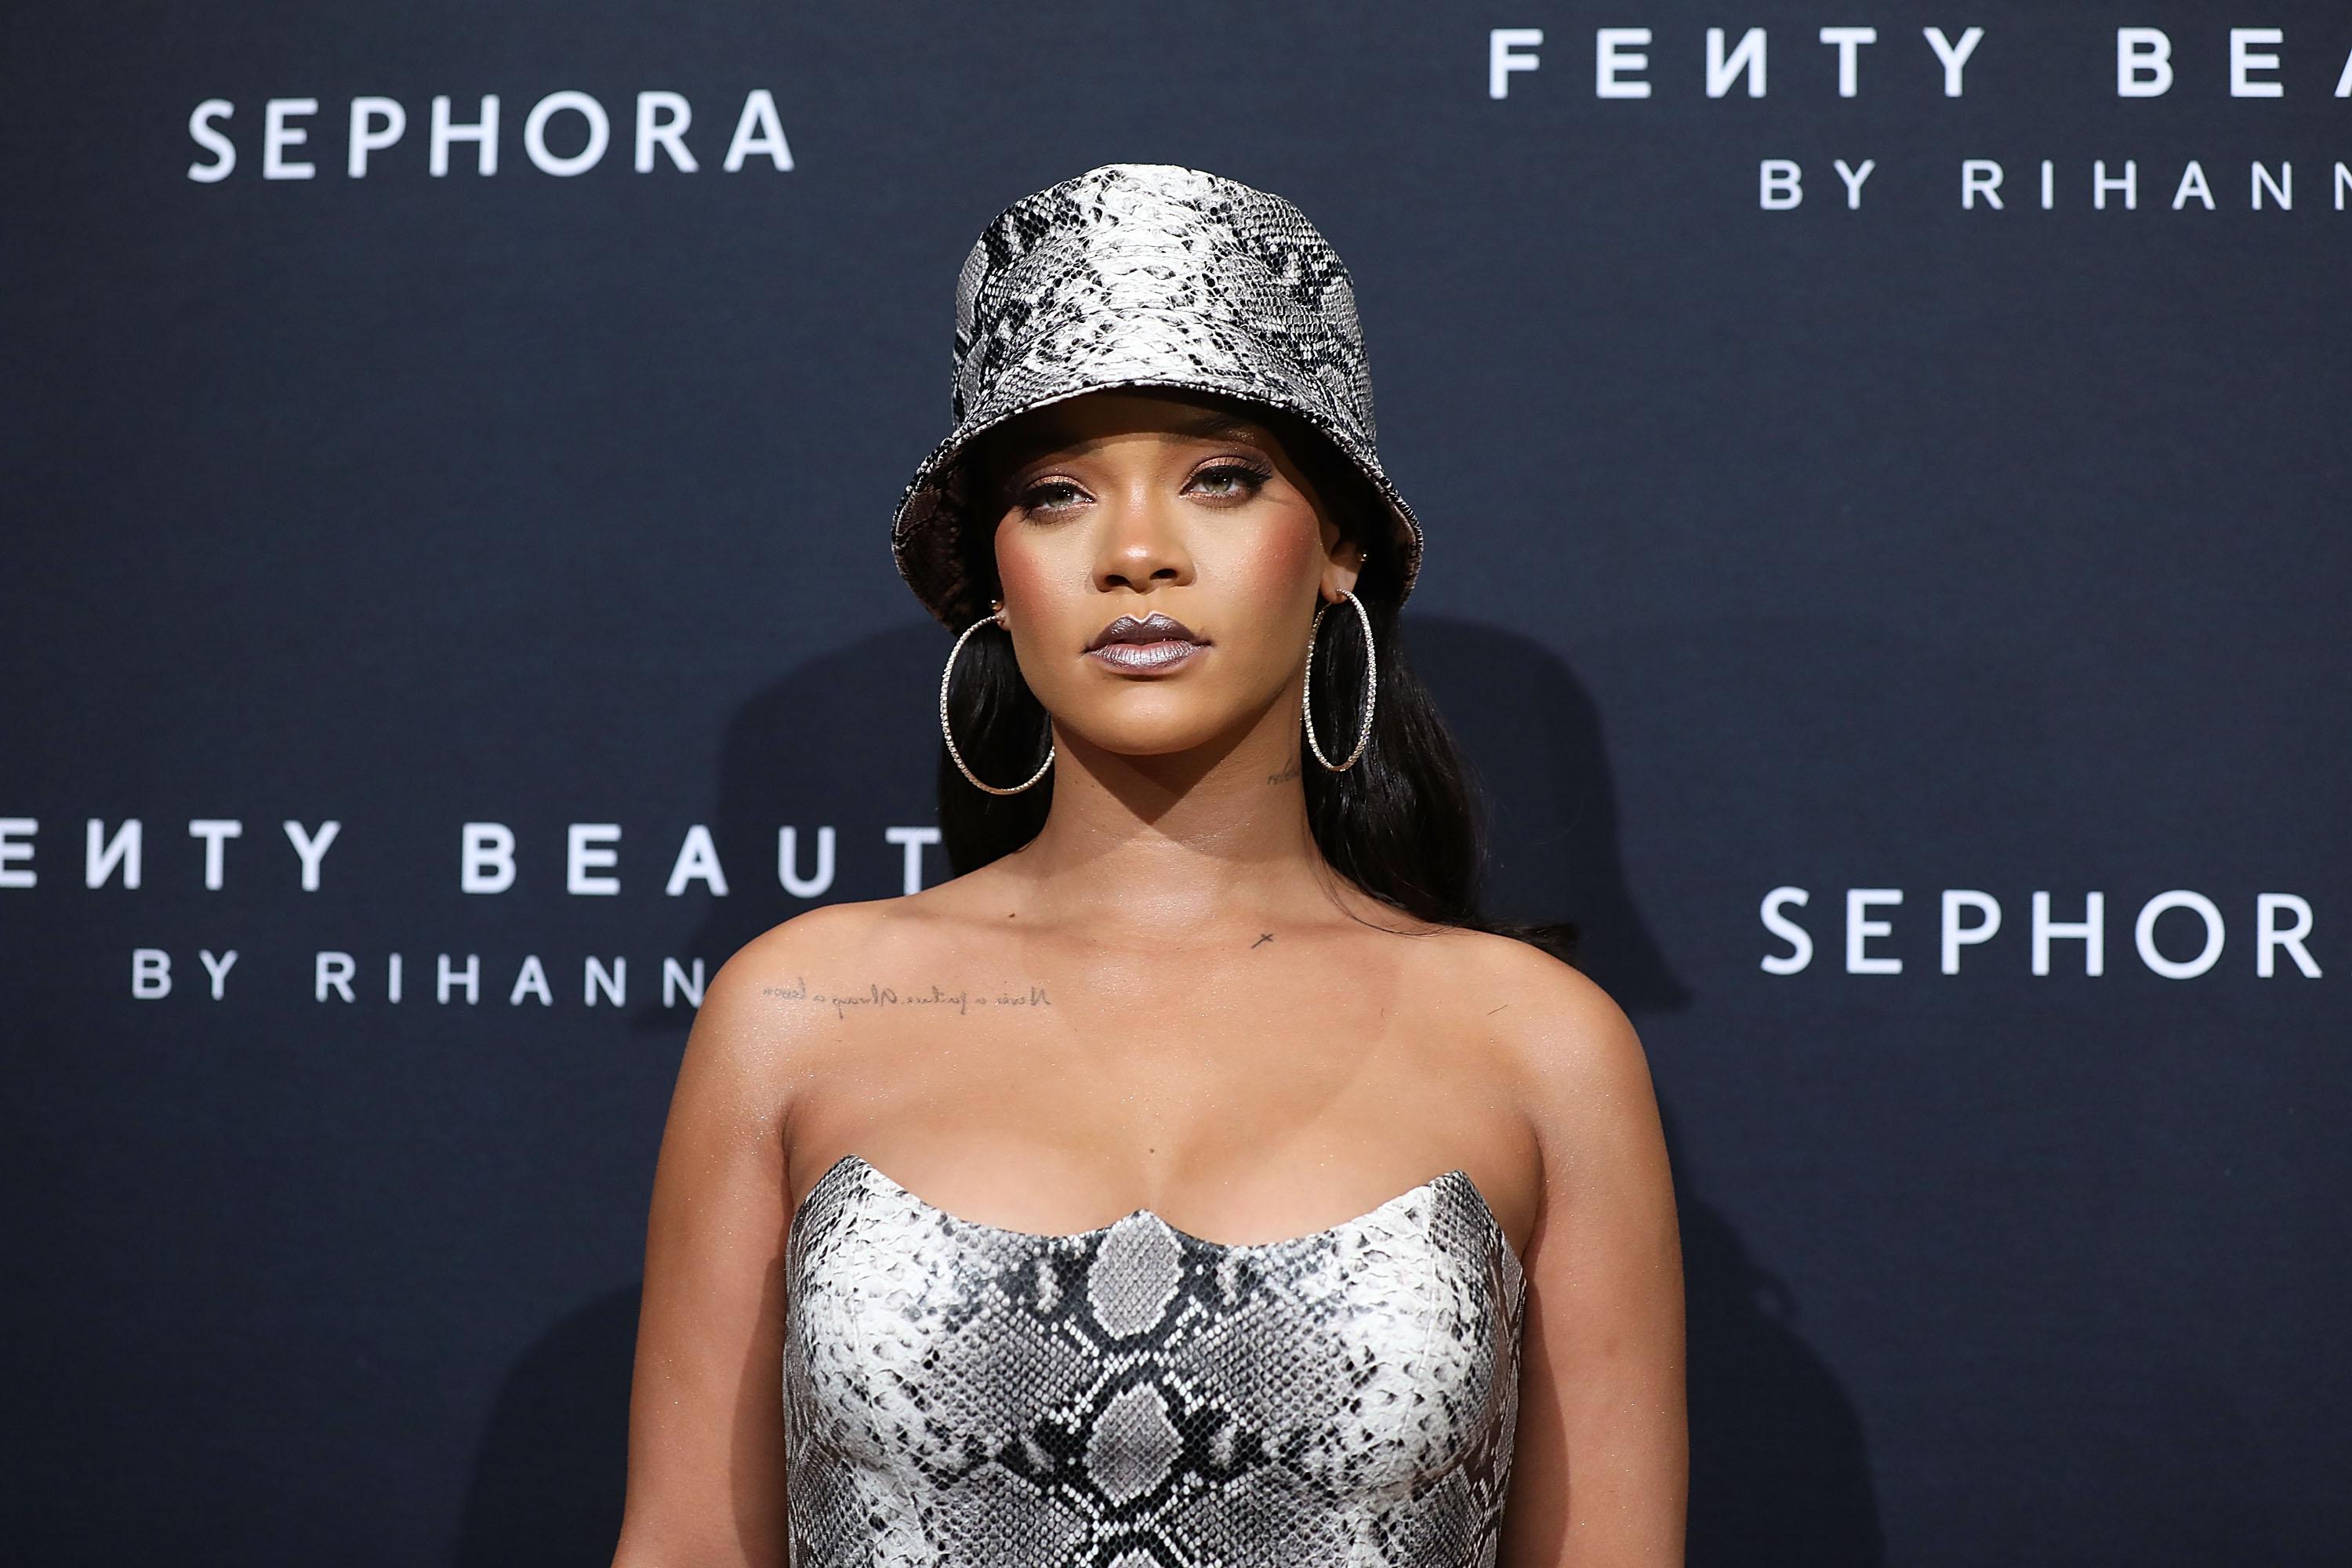 Rihanna stares straight ahead, wearing a bucket hat and large hoop earrings. Behind her are signs for Fenty Beauty and Sephora.